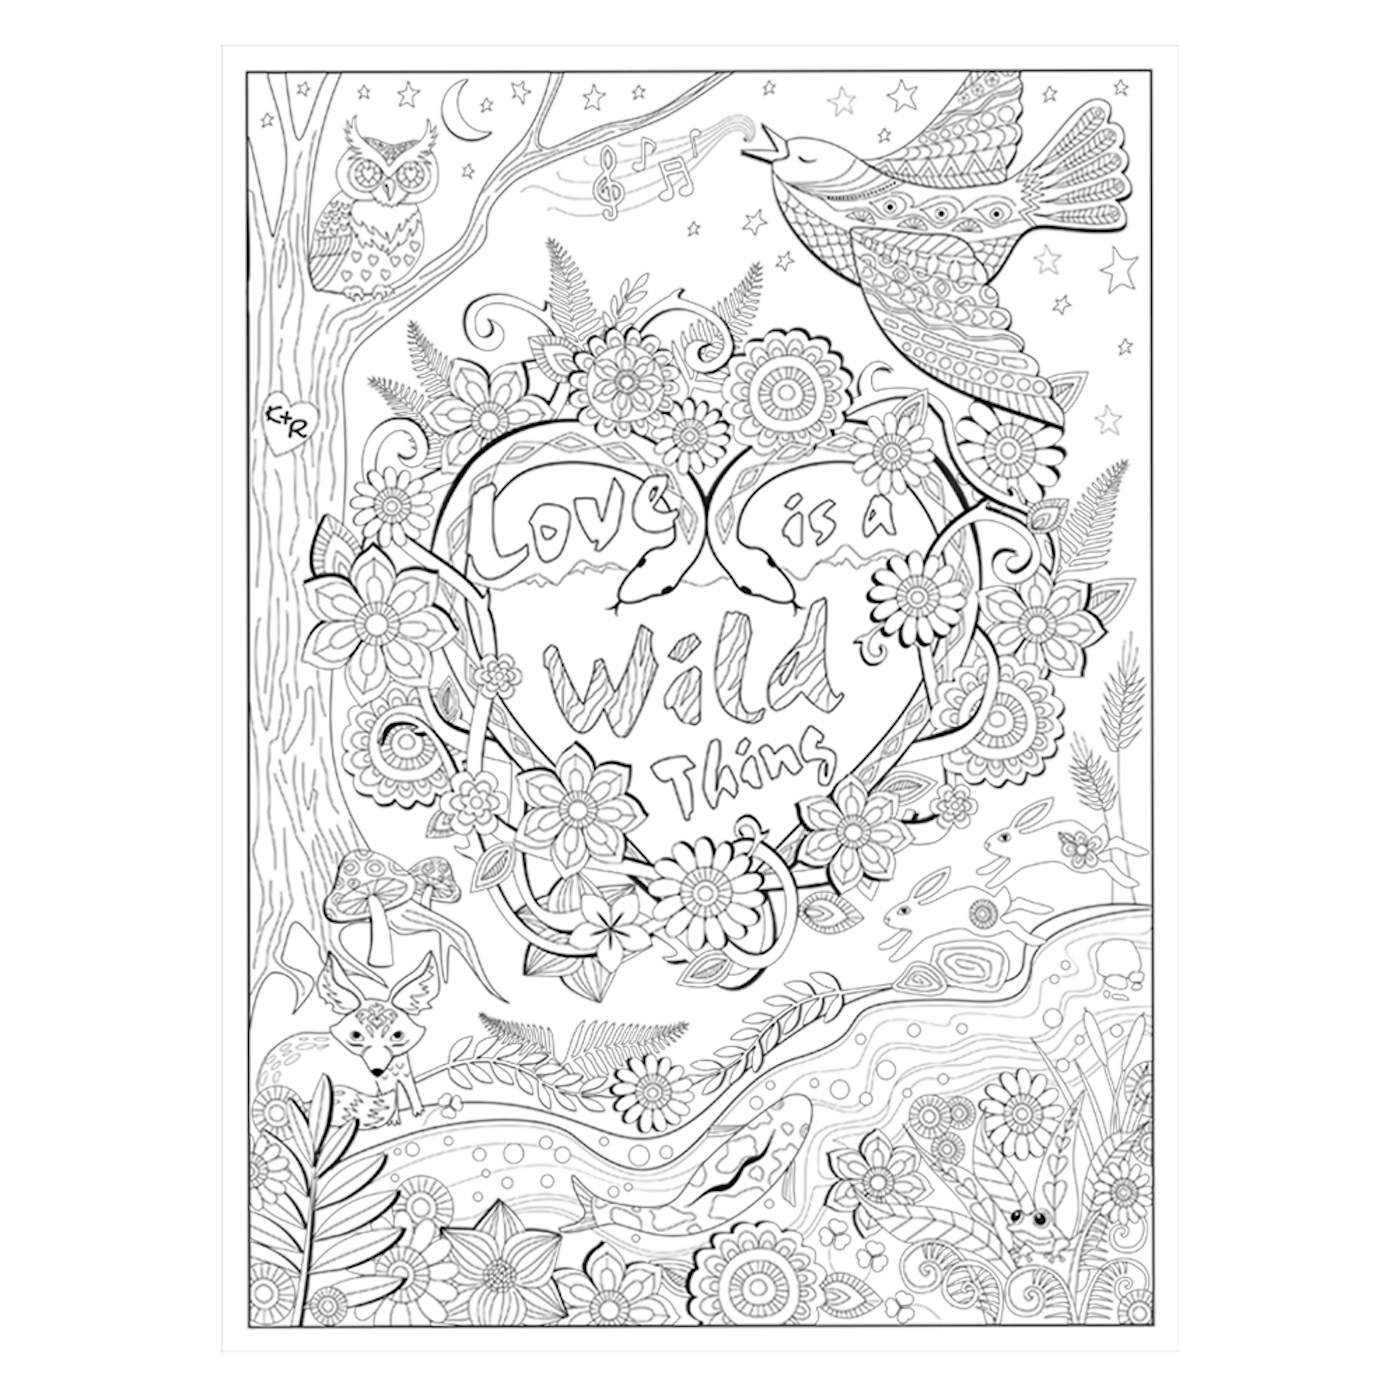 https://merchbar.imgix.net/product/0/8175/3342956986432/c9OccjzVKM-Coloring-Book-Love-Wild-Thing.png?q=40&auto=compress,format&w=1400